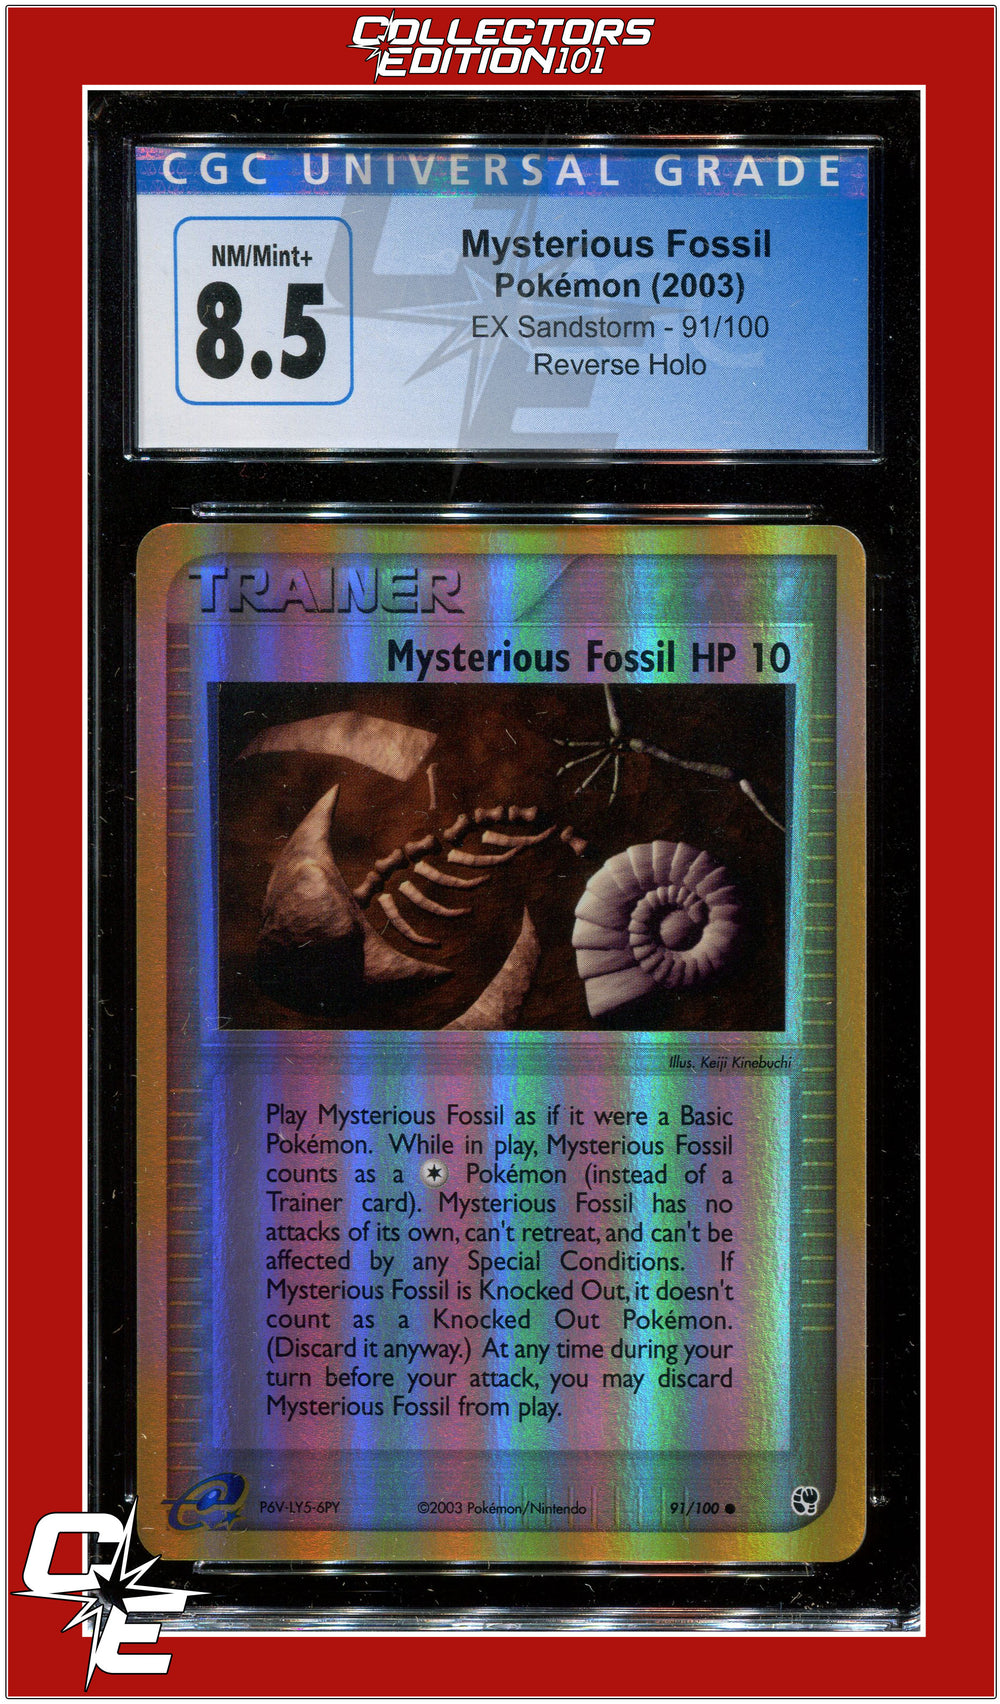 EX Sandstorm Mysterious Fossil Reverse Holo 91/100 CGC 8.5